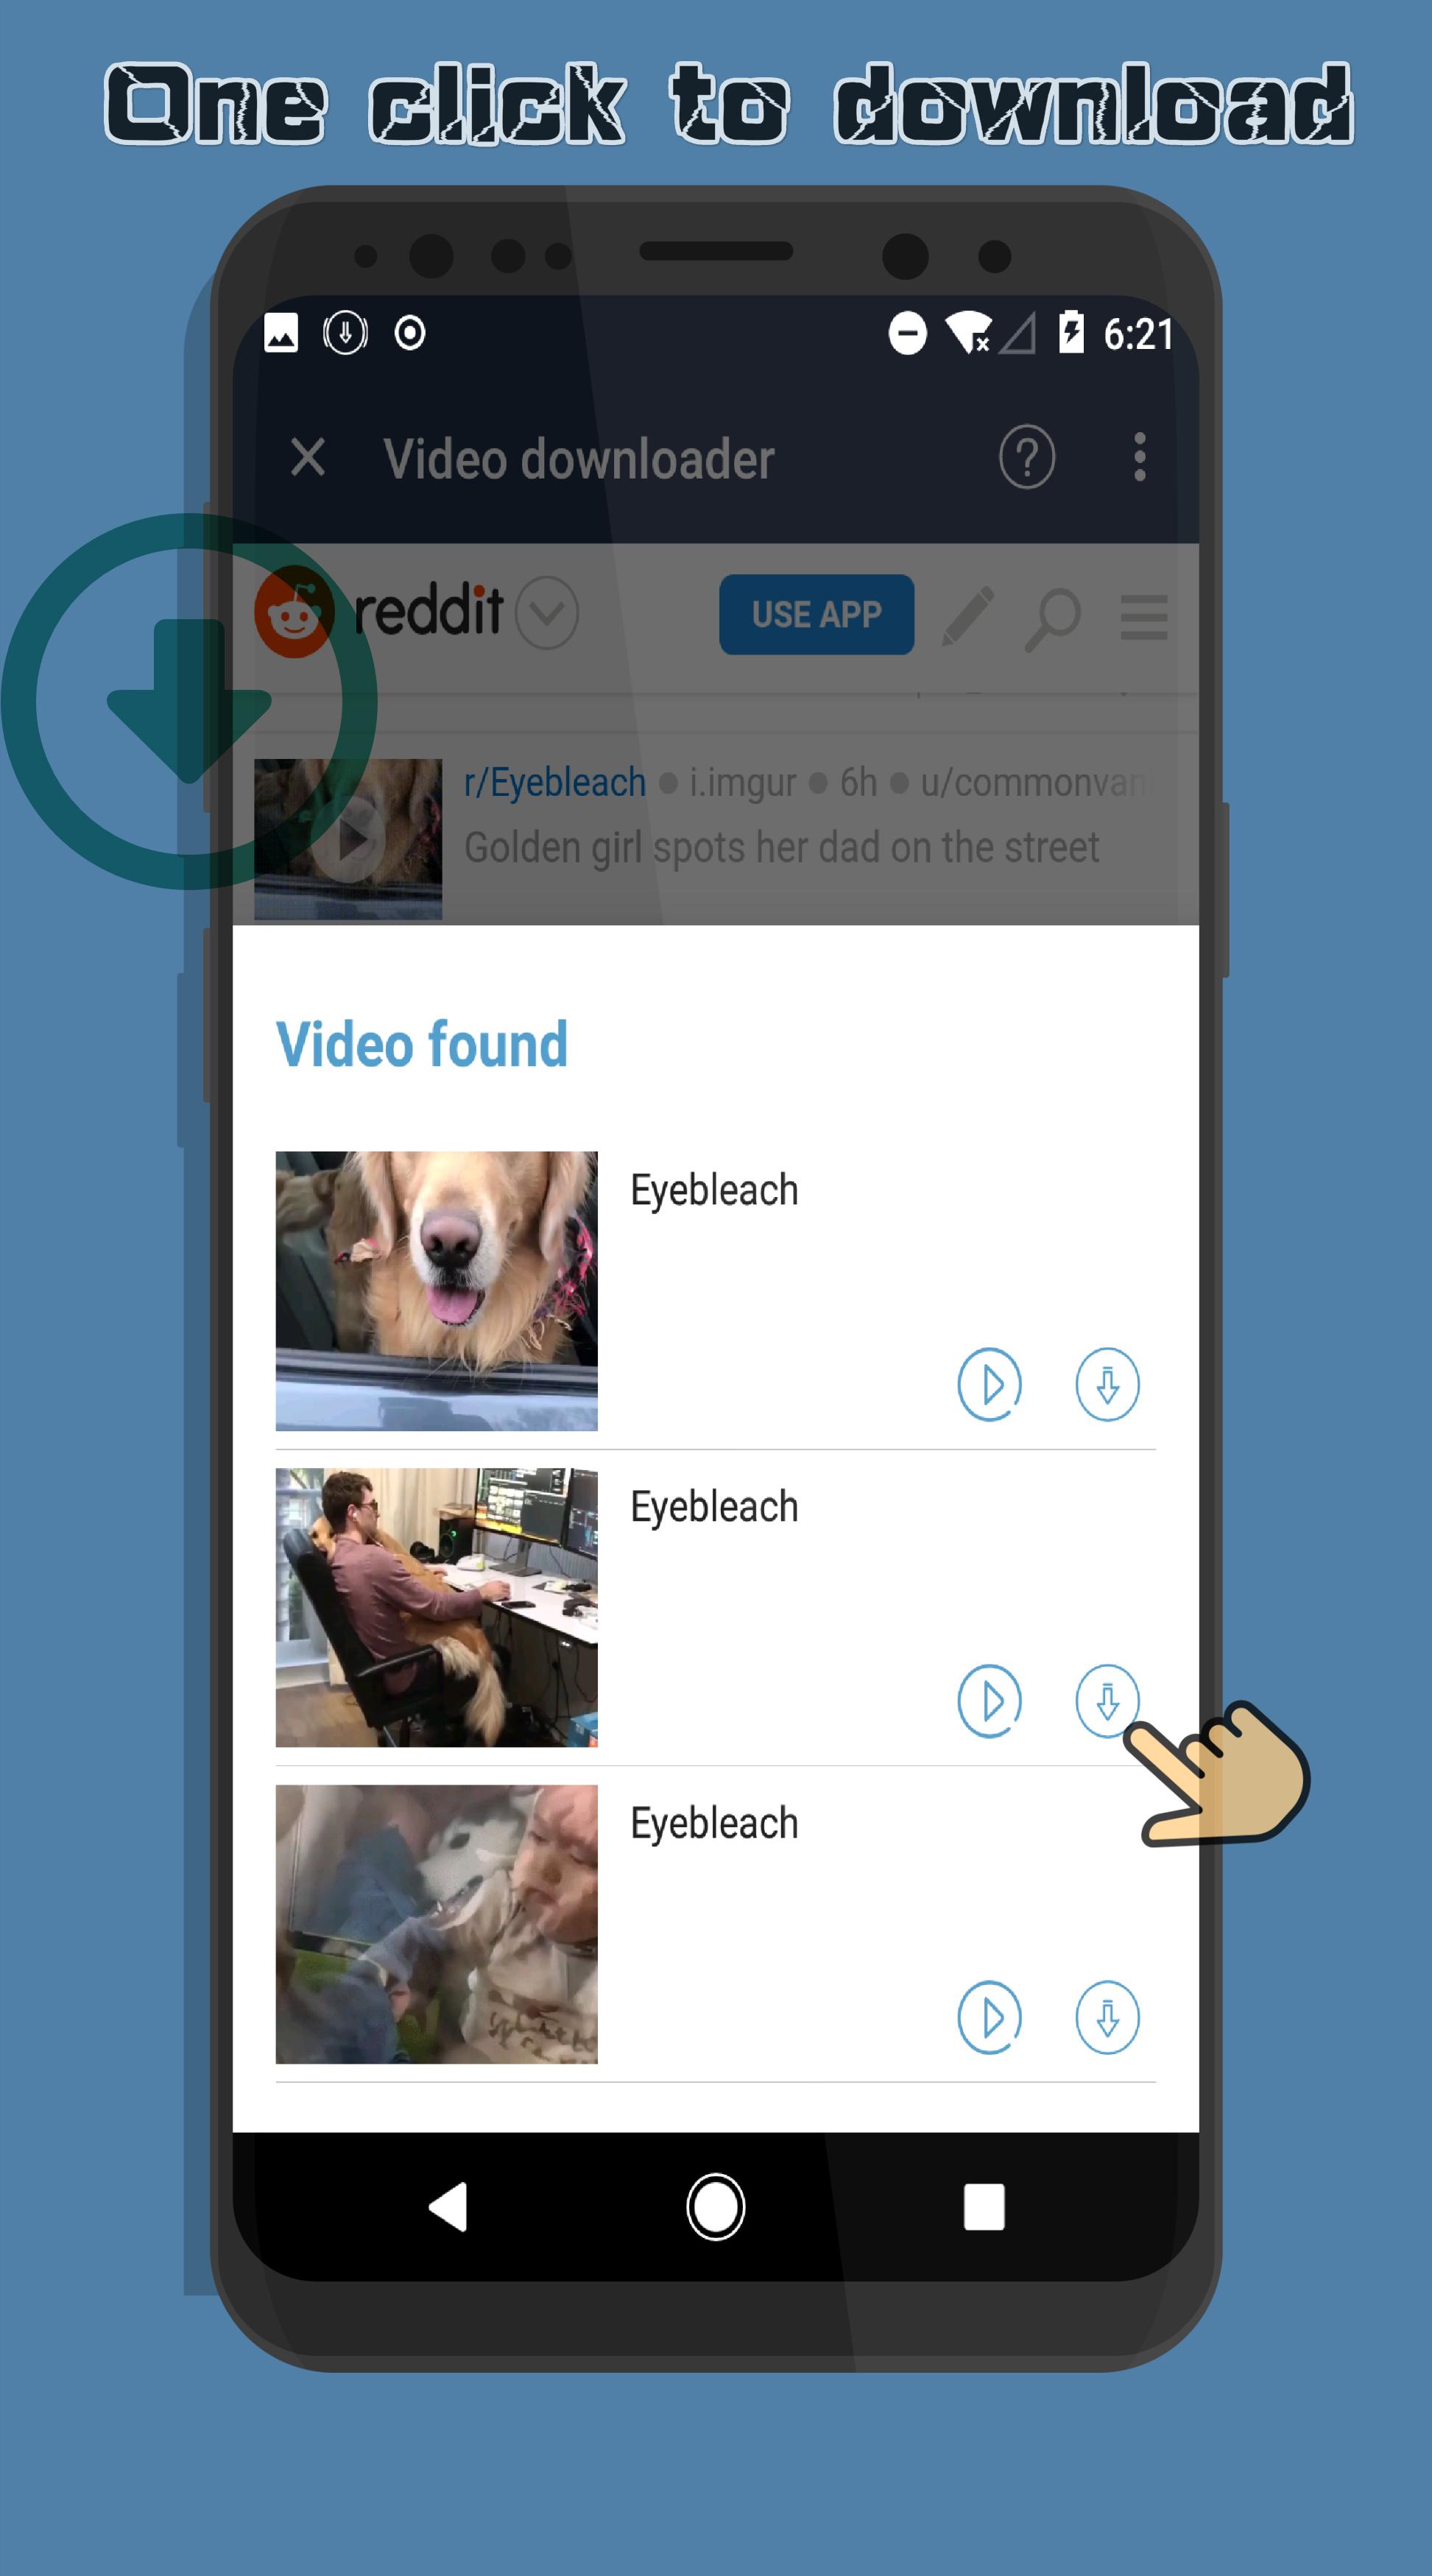 how to download video from tumblr on android